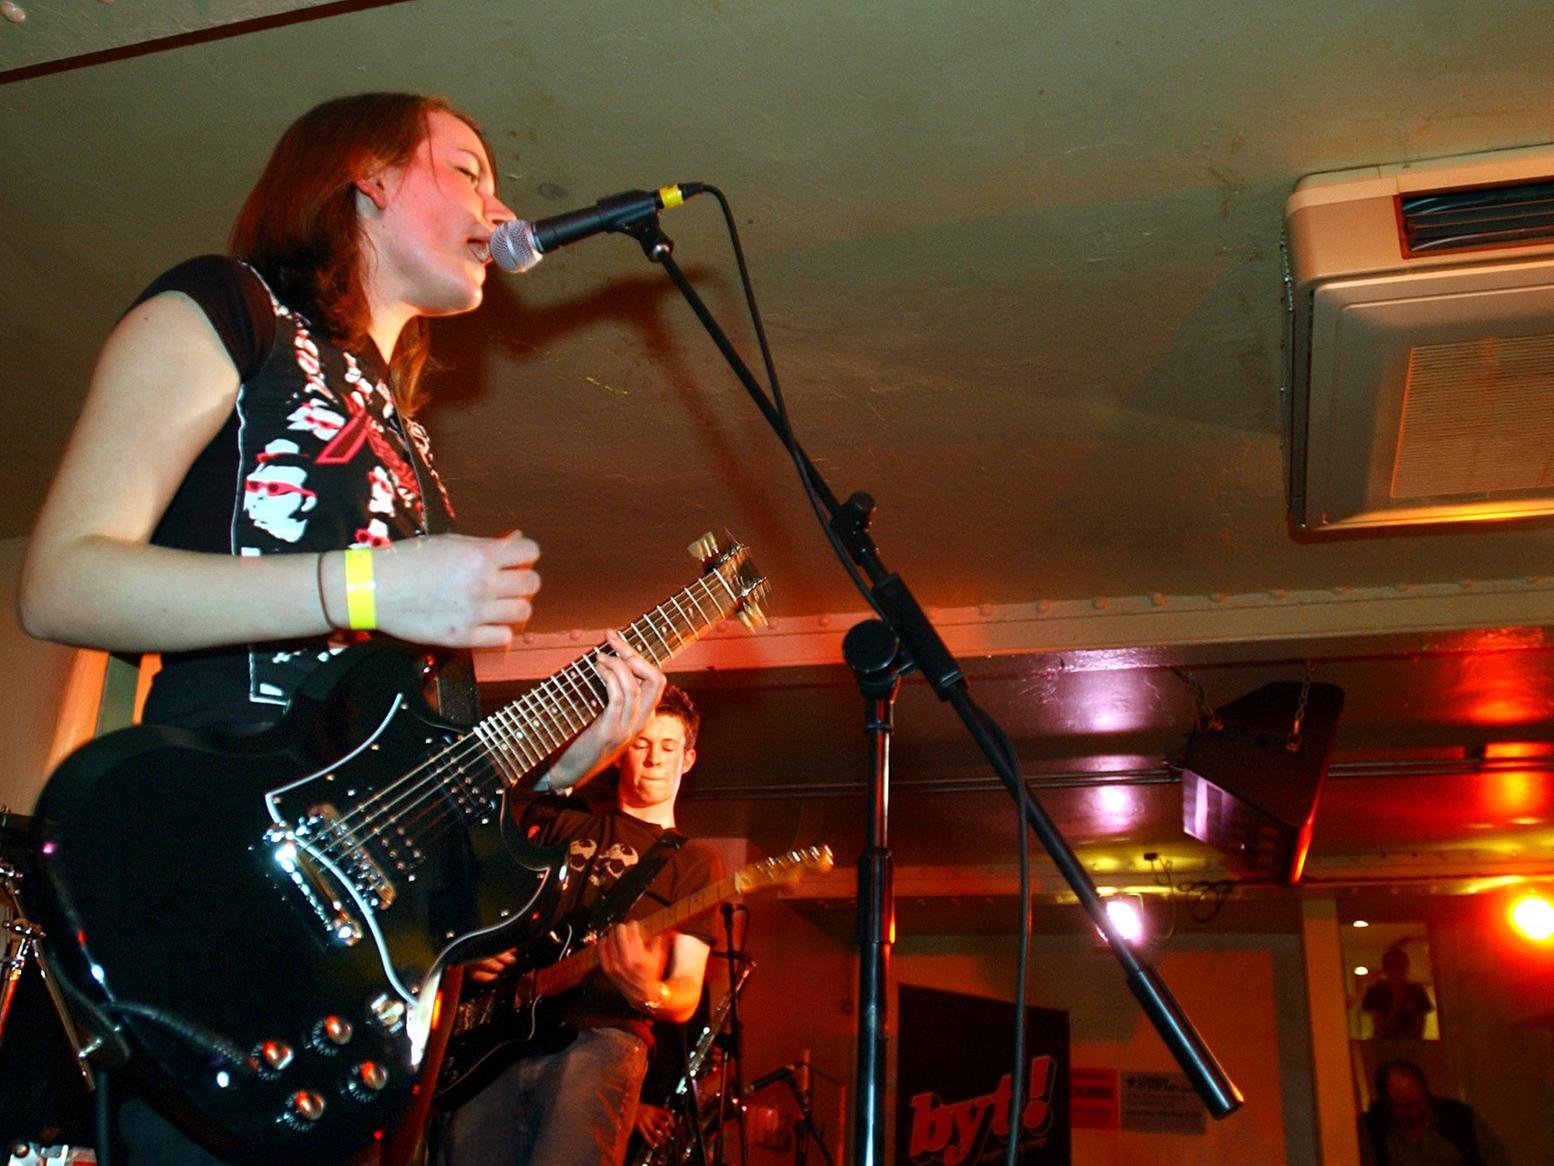 Lead singer Katie Harkin on stage at the Bright Young Things final held at the Hi-Fi Club in 2004.